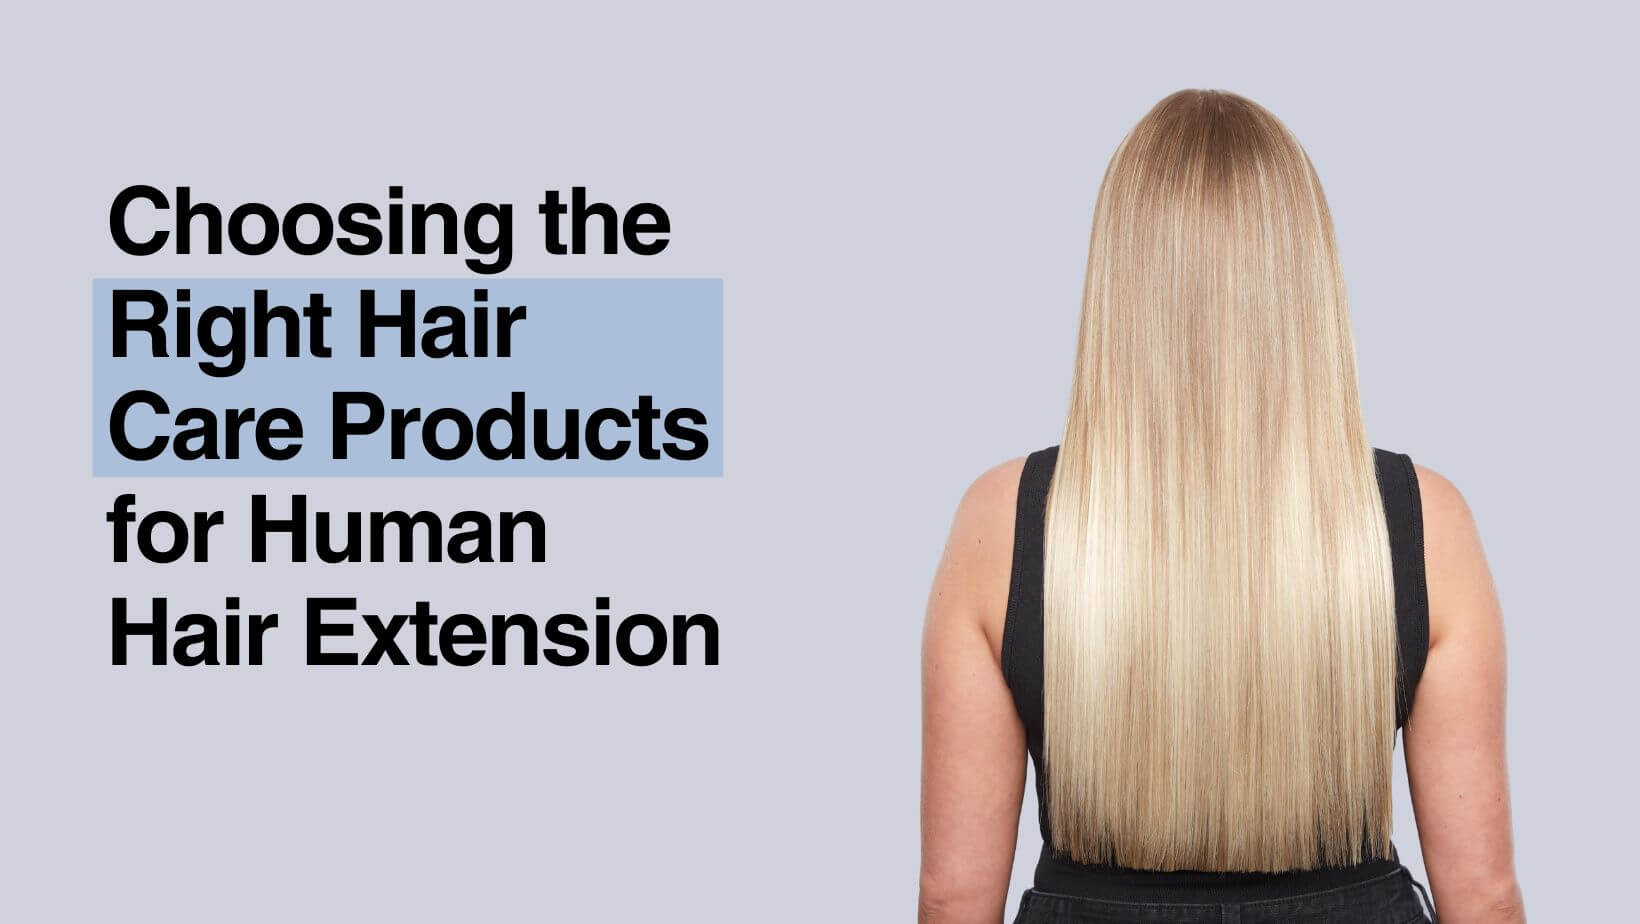 Choosing the Right Hair Care Products for Human Hair Extension